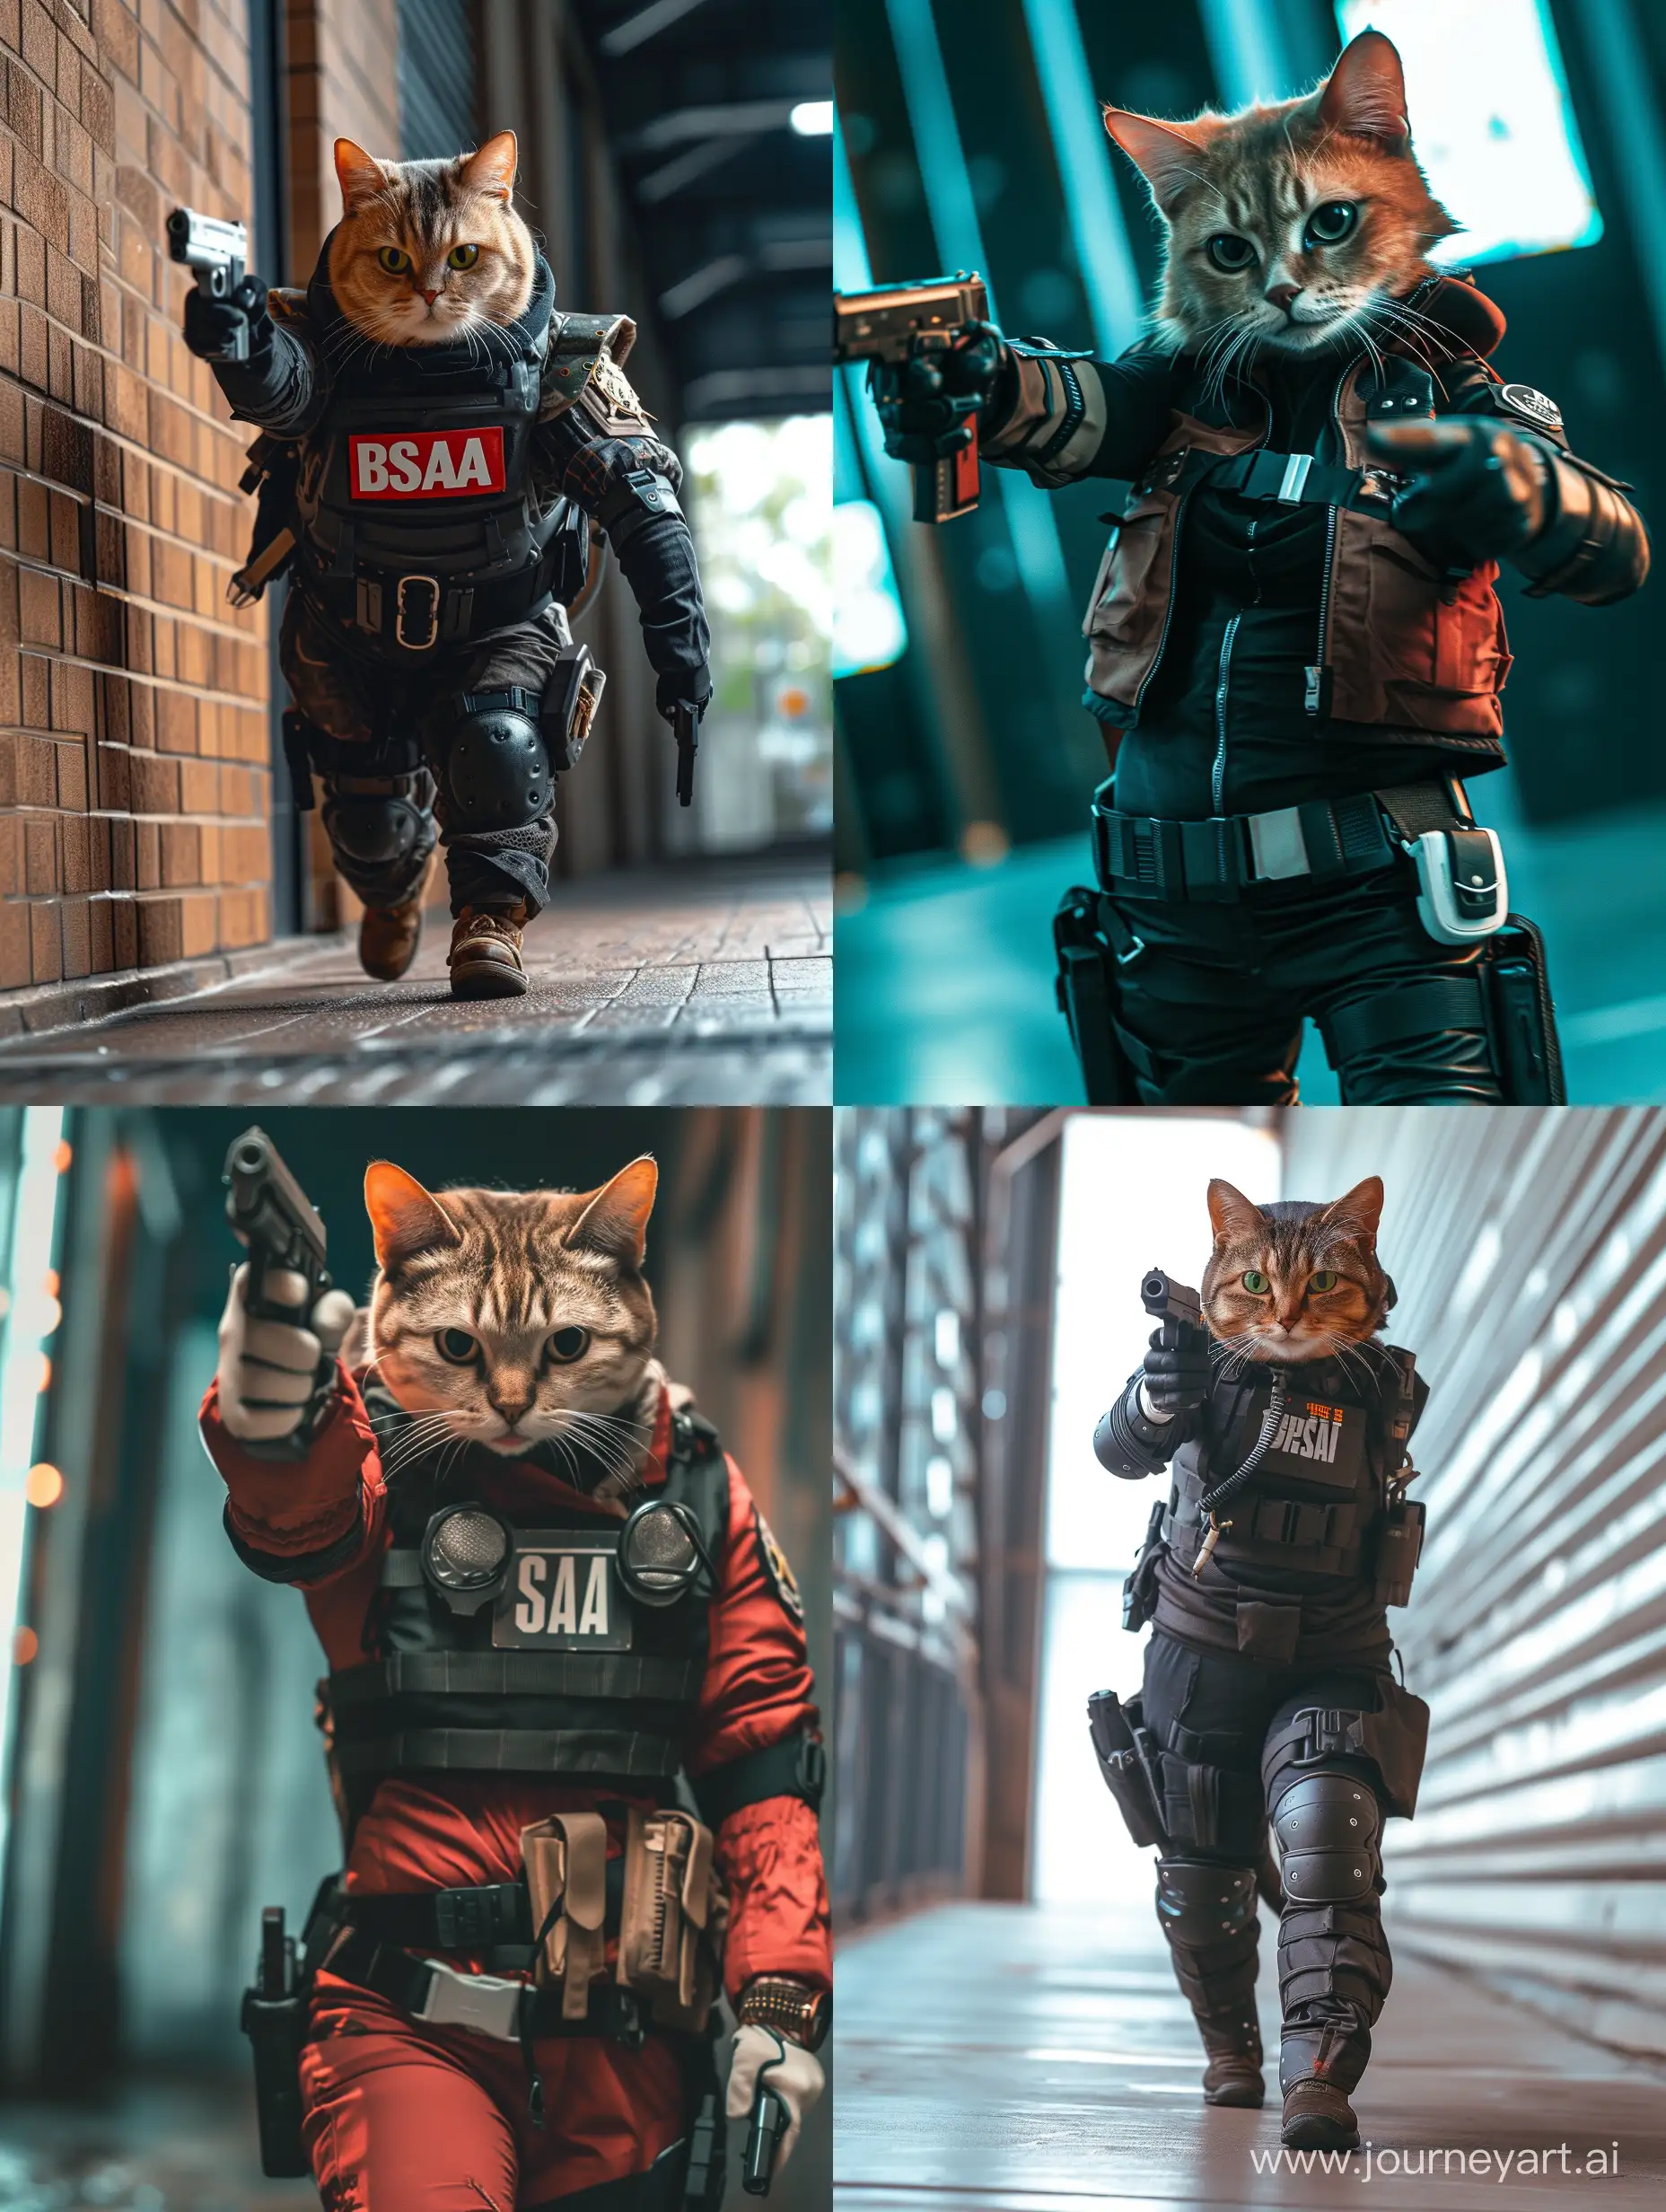 Resident evil styled cute chubby cat bsaa unit in bsaa clothing, wolking into Racoon city, cyberpunk styled, pointing gun at camera